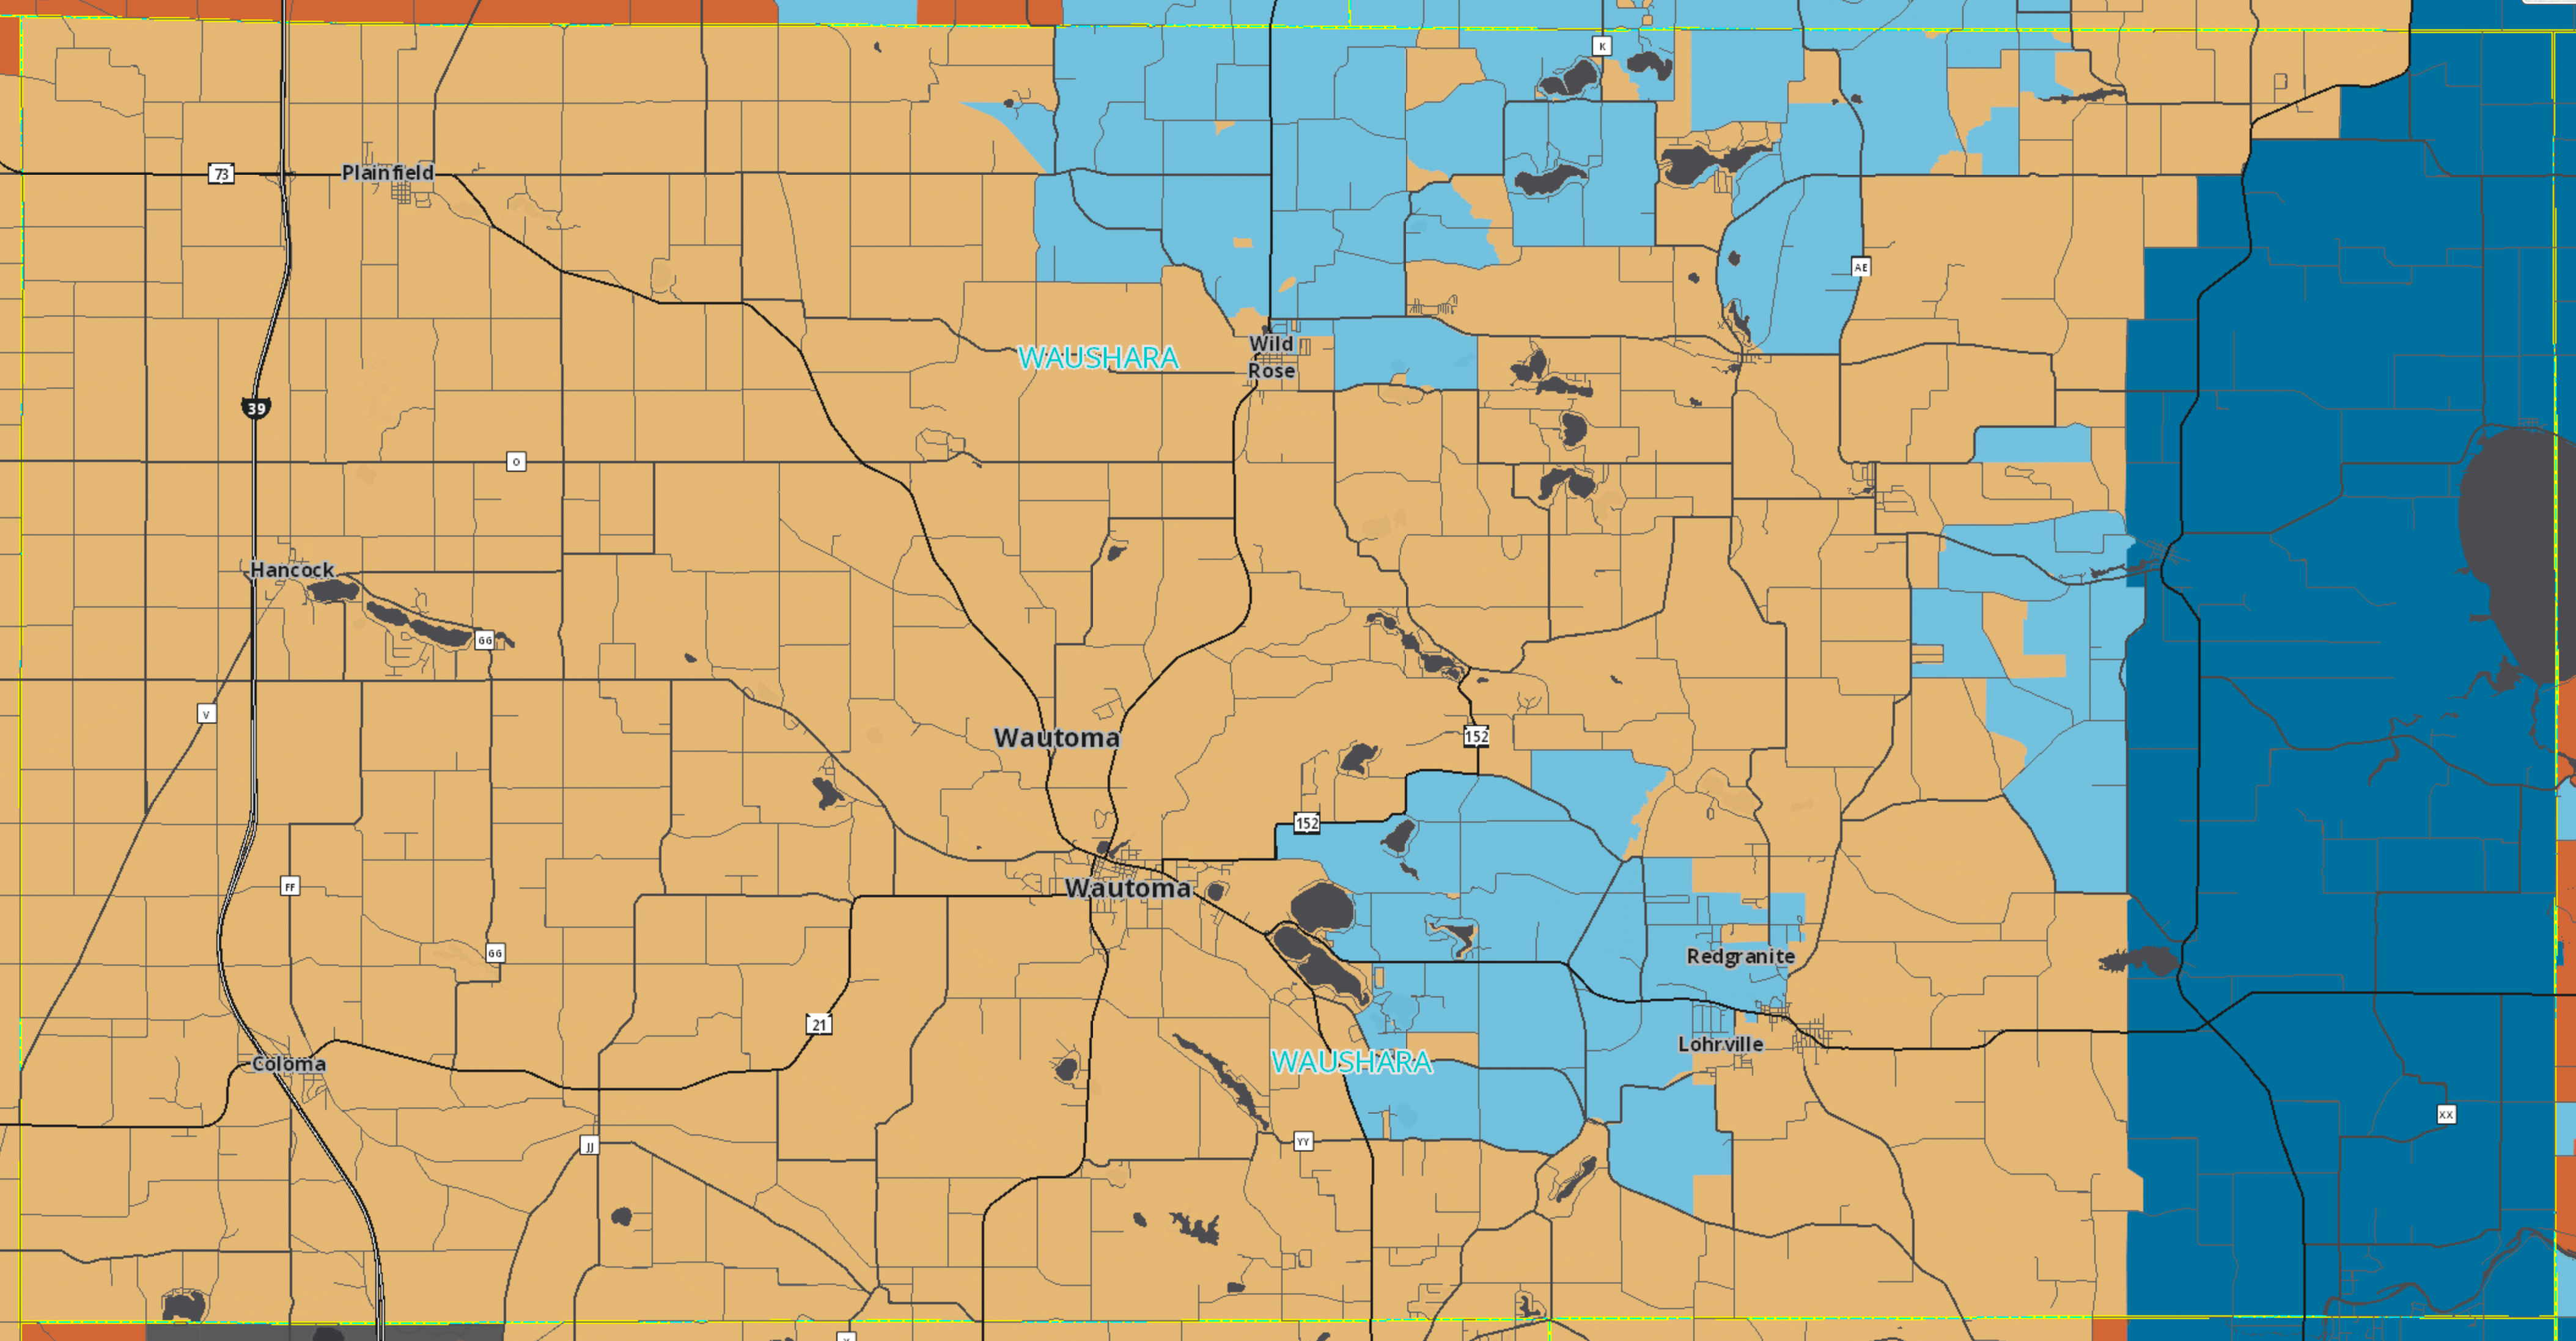 A screenshot of a wireless coverage map for Waushara County, Wisconsin with a color overlay. Most of the overlay is colored tan, which represents areas of the county which have downlink speeds between 3 and 9.99 megabits per second. There are sparse light blue and dark blue areas which indicate faster service, but are far from being the majority of the county.